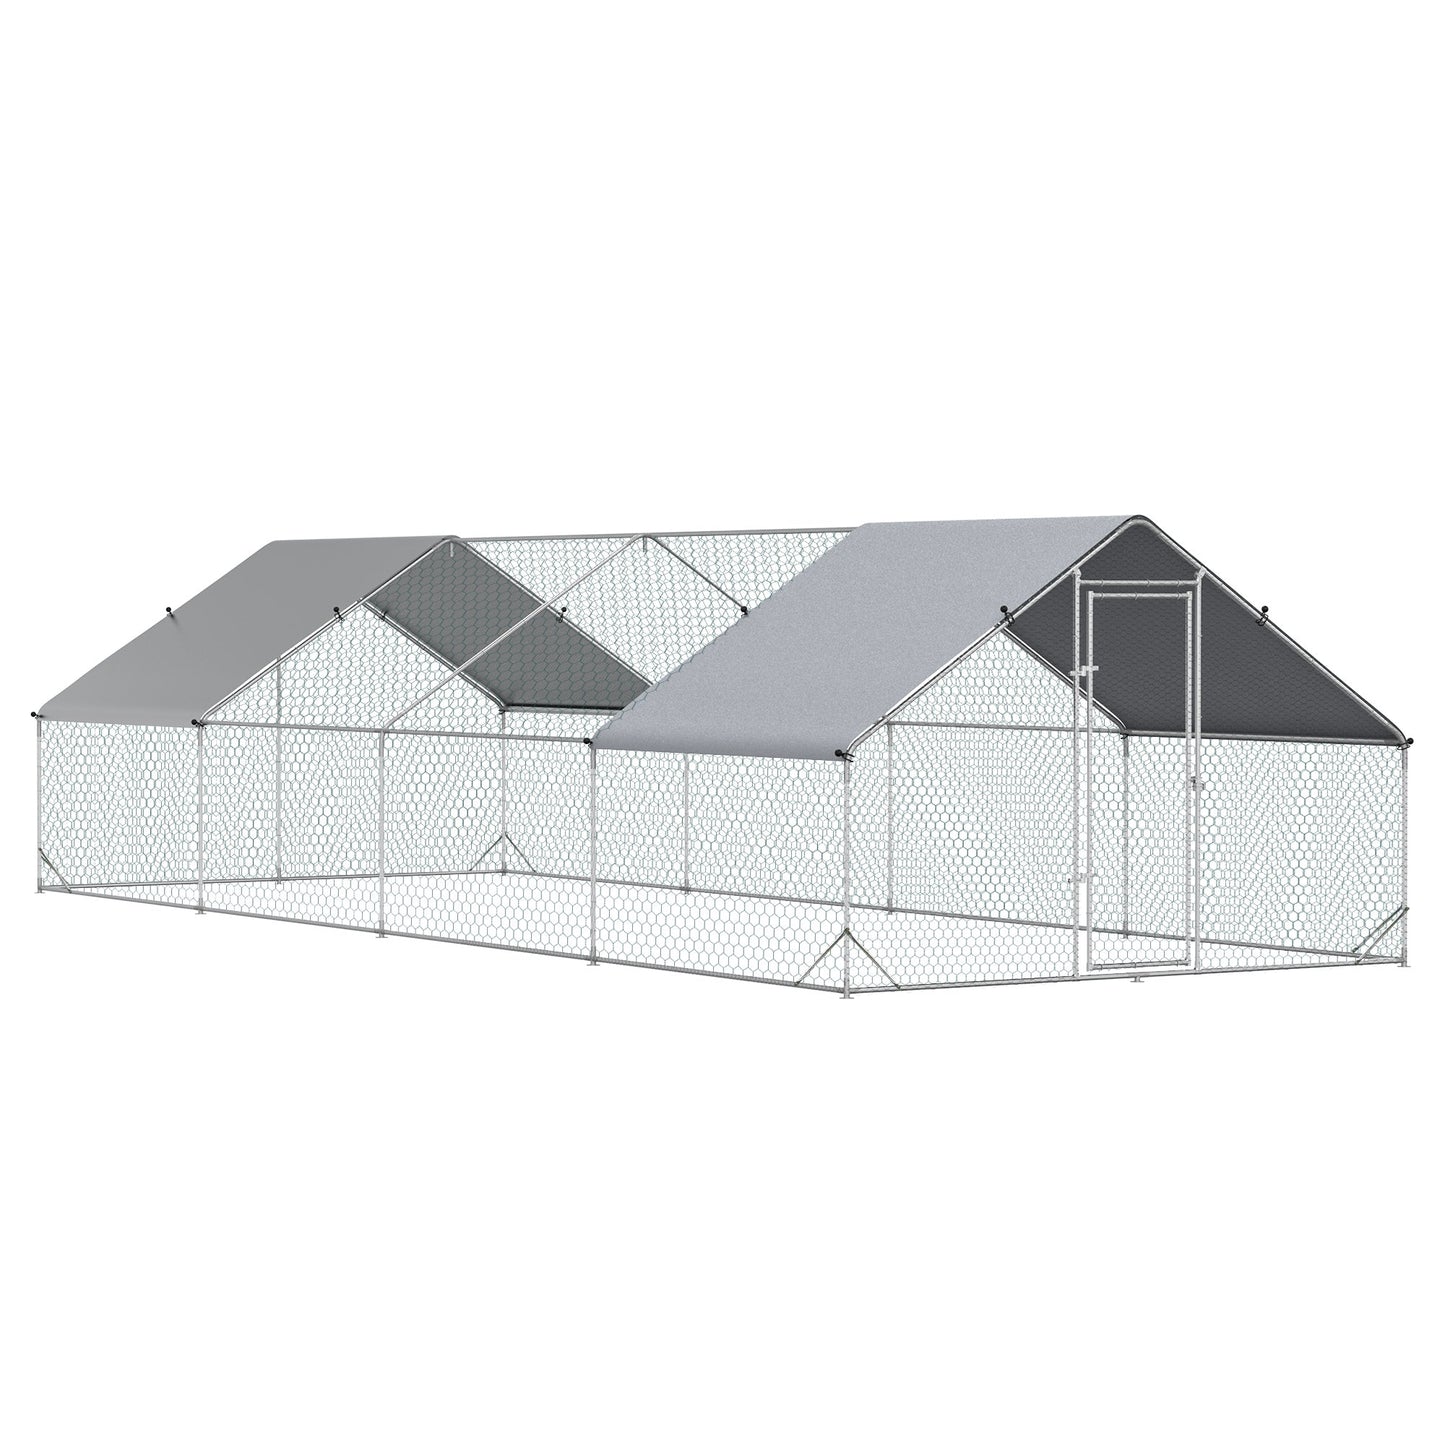 Pet Supplies-10' x 26' x 6.5' Large Metal Chicken Coop with Run, Walk-in Poultry Cage Hen Playpen House with Cover & Lockable Door for Farm Backyard, Silver - Outdoor Style Company